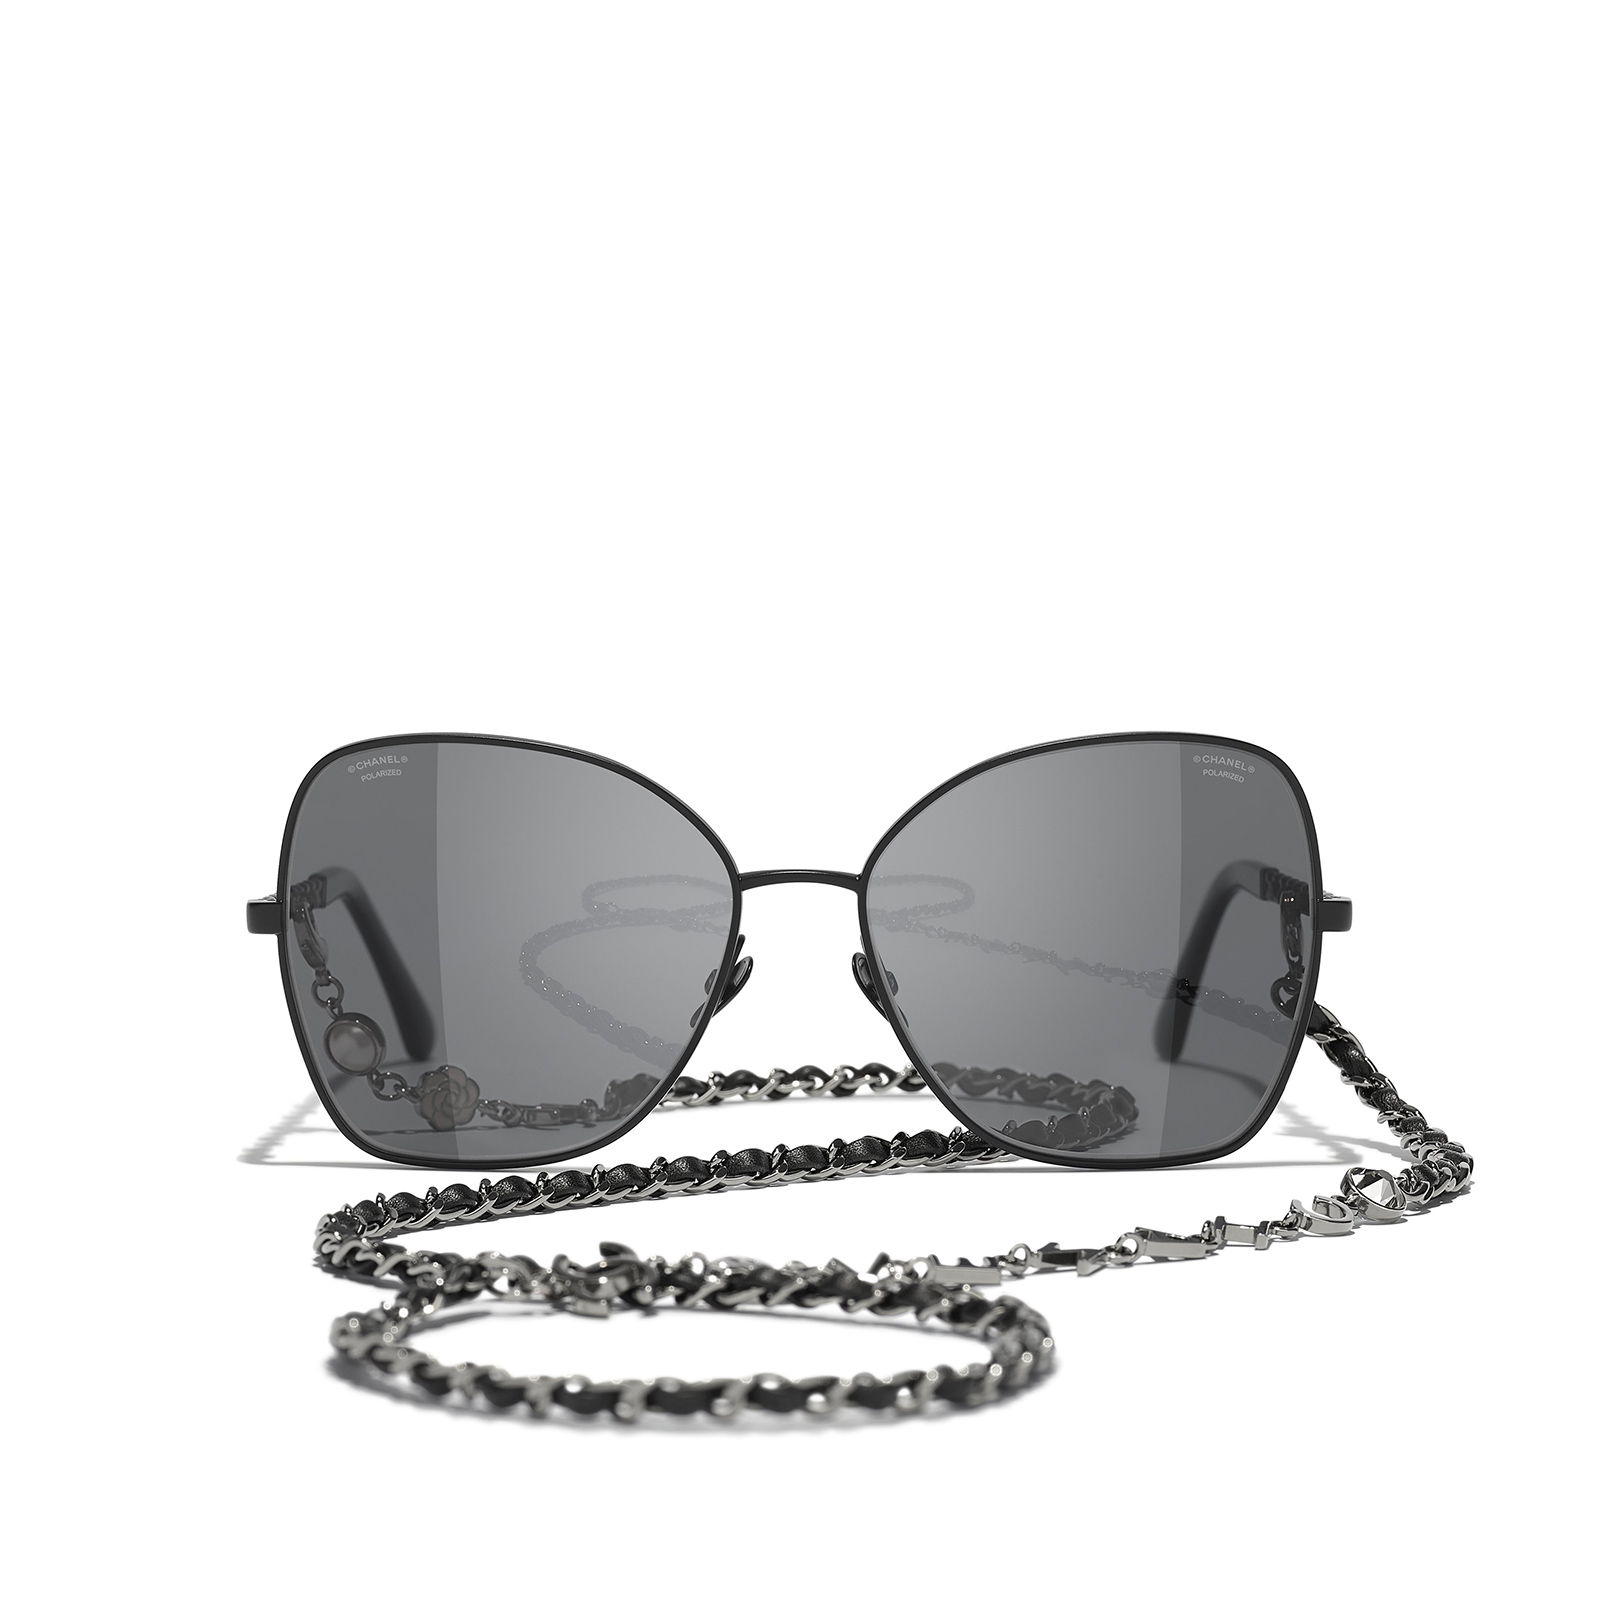 CHANEL butterfly Sunglasses C101T8 Black - front view